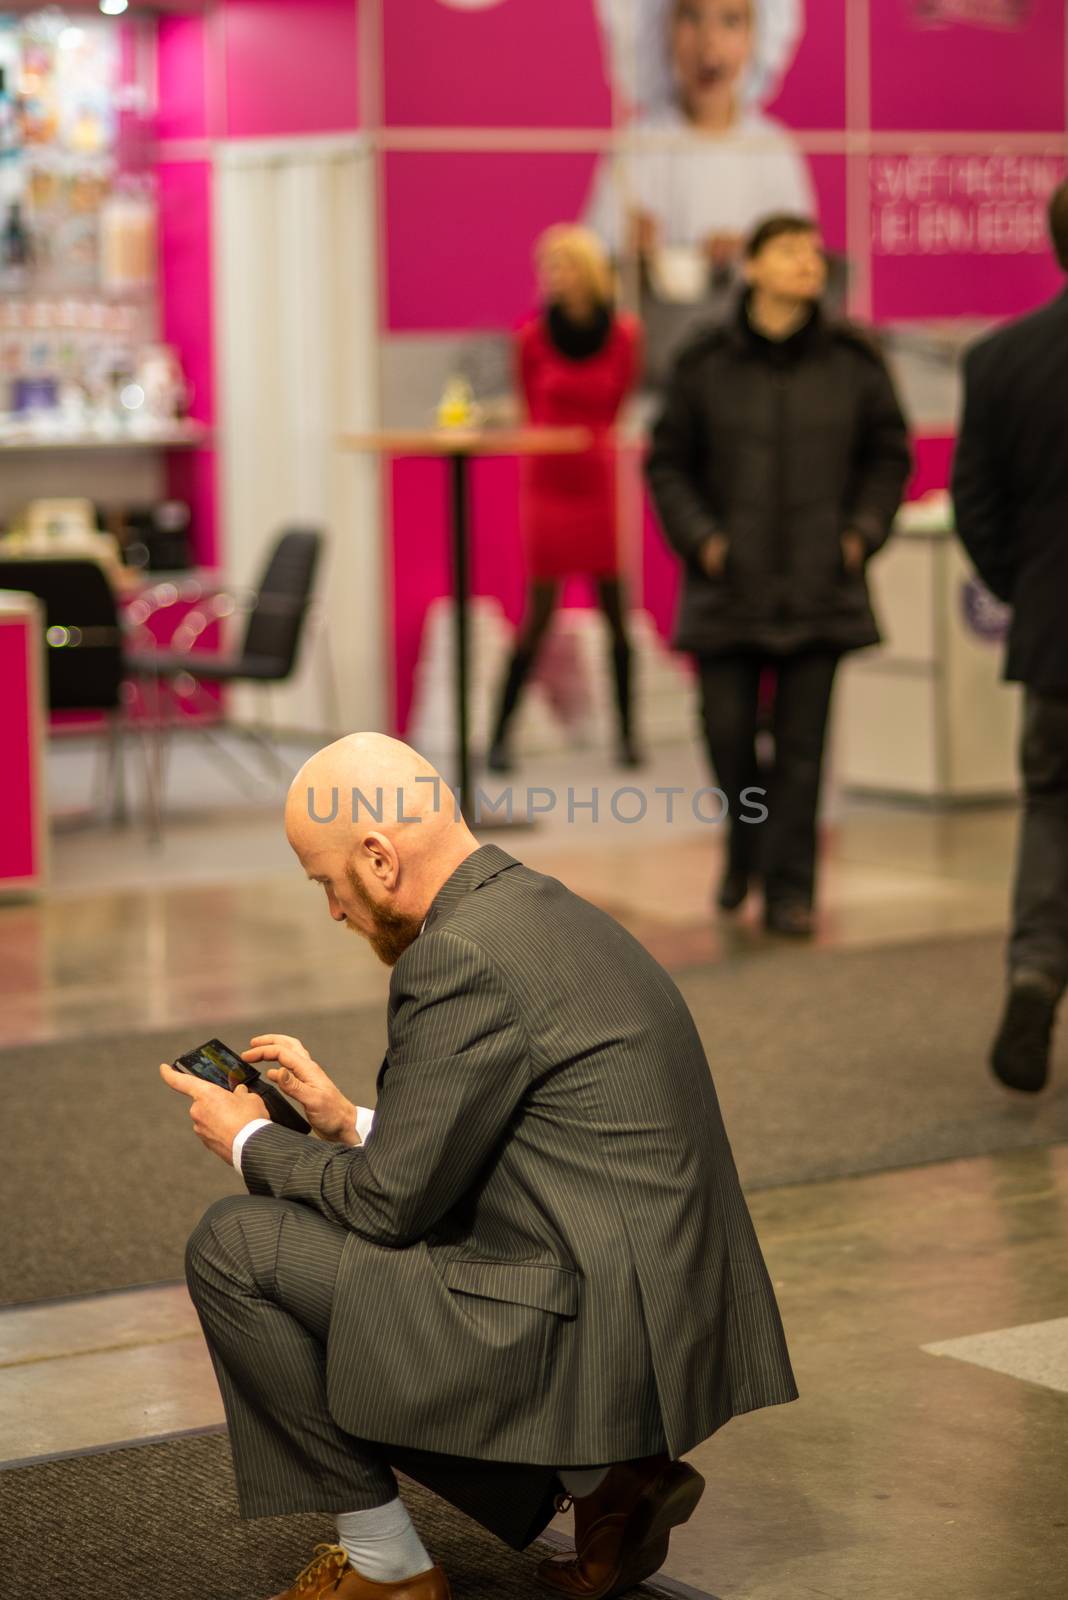 03/04/2018. Brno, Czech Republic. Young business man checking his phone while attending an event at the convention trade center in Brno. BVV Brno Exhibition center. Czech Republic by gonzalobell